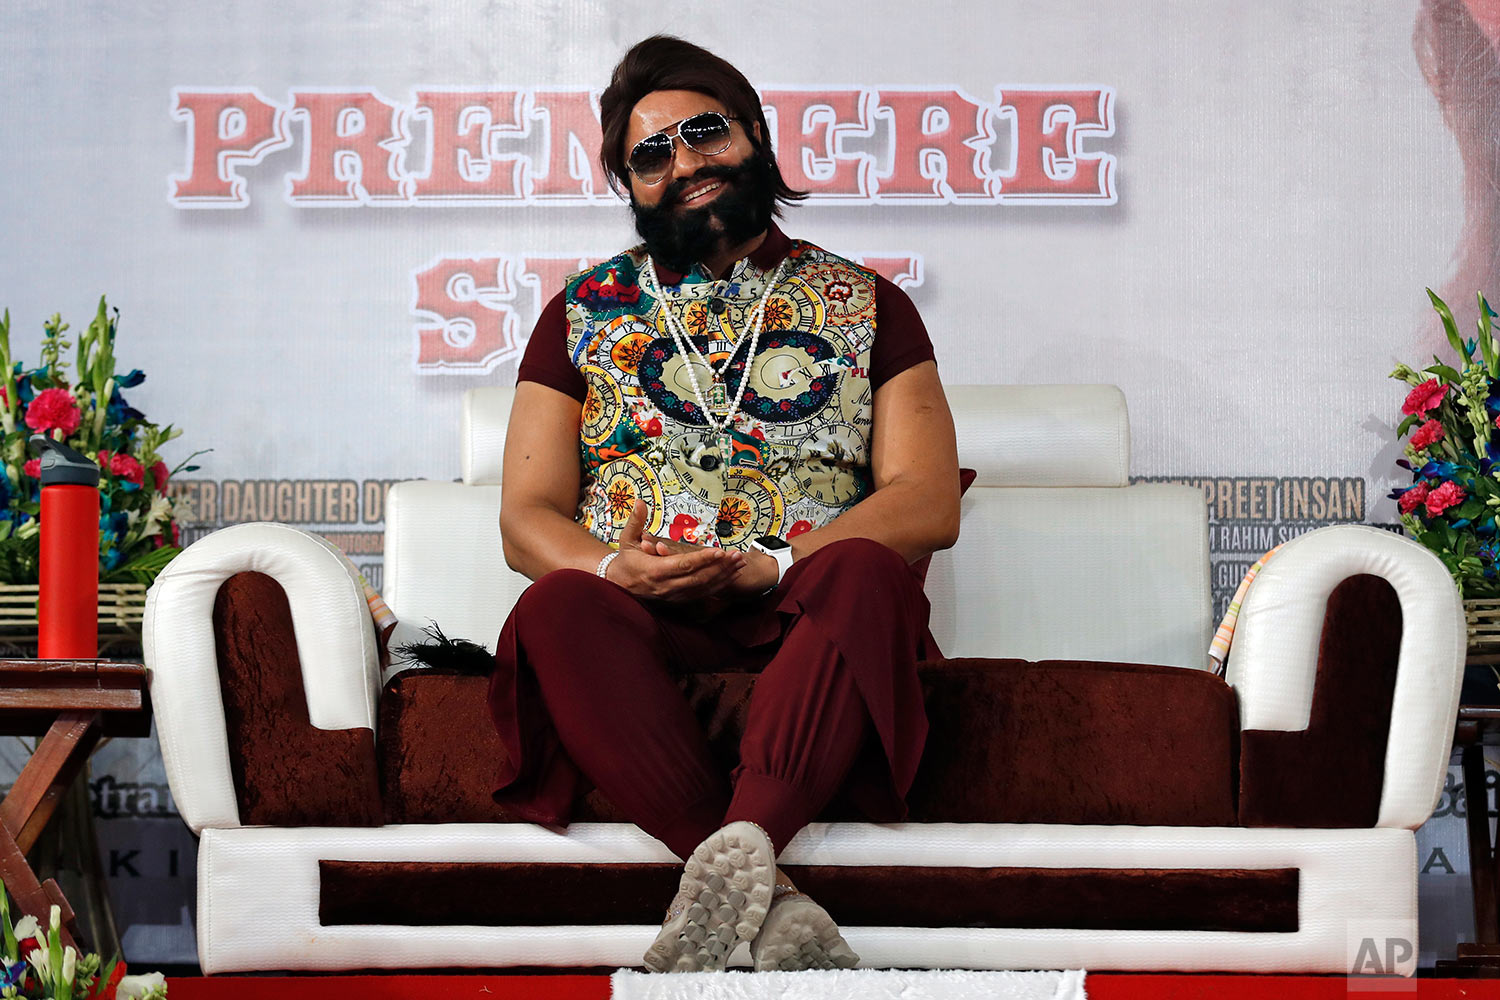  In this May 17, 2017 photo, an Indian spiritual guru, who calls himself Dr. Saint Gurmeet Singh Ram Rahim Insan, attends the premiere of the movie "Jattu Engineer" in New Delhi, India. A judge on Monday, Aug. 28, 2017 sentenced the flamboyant and co